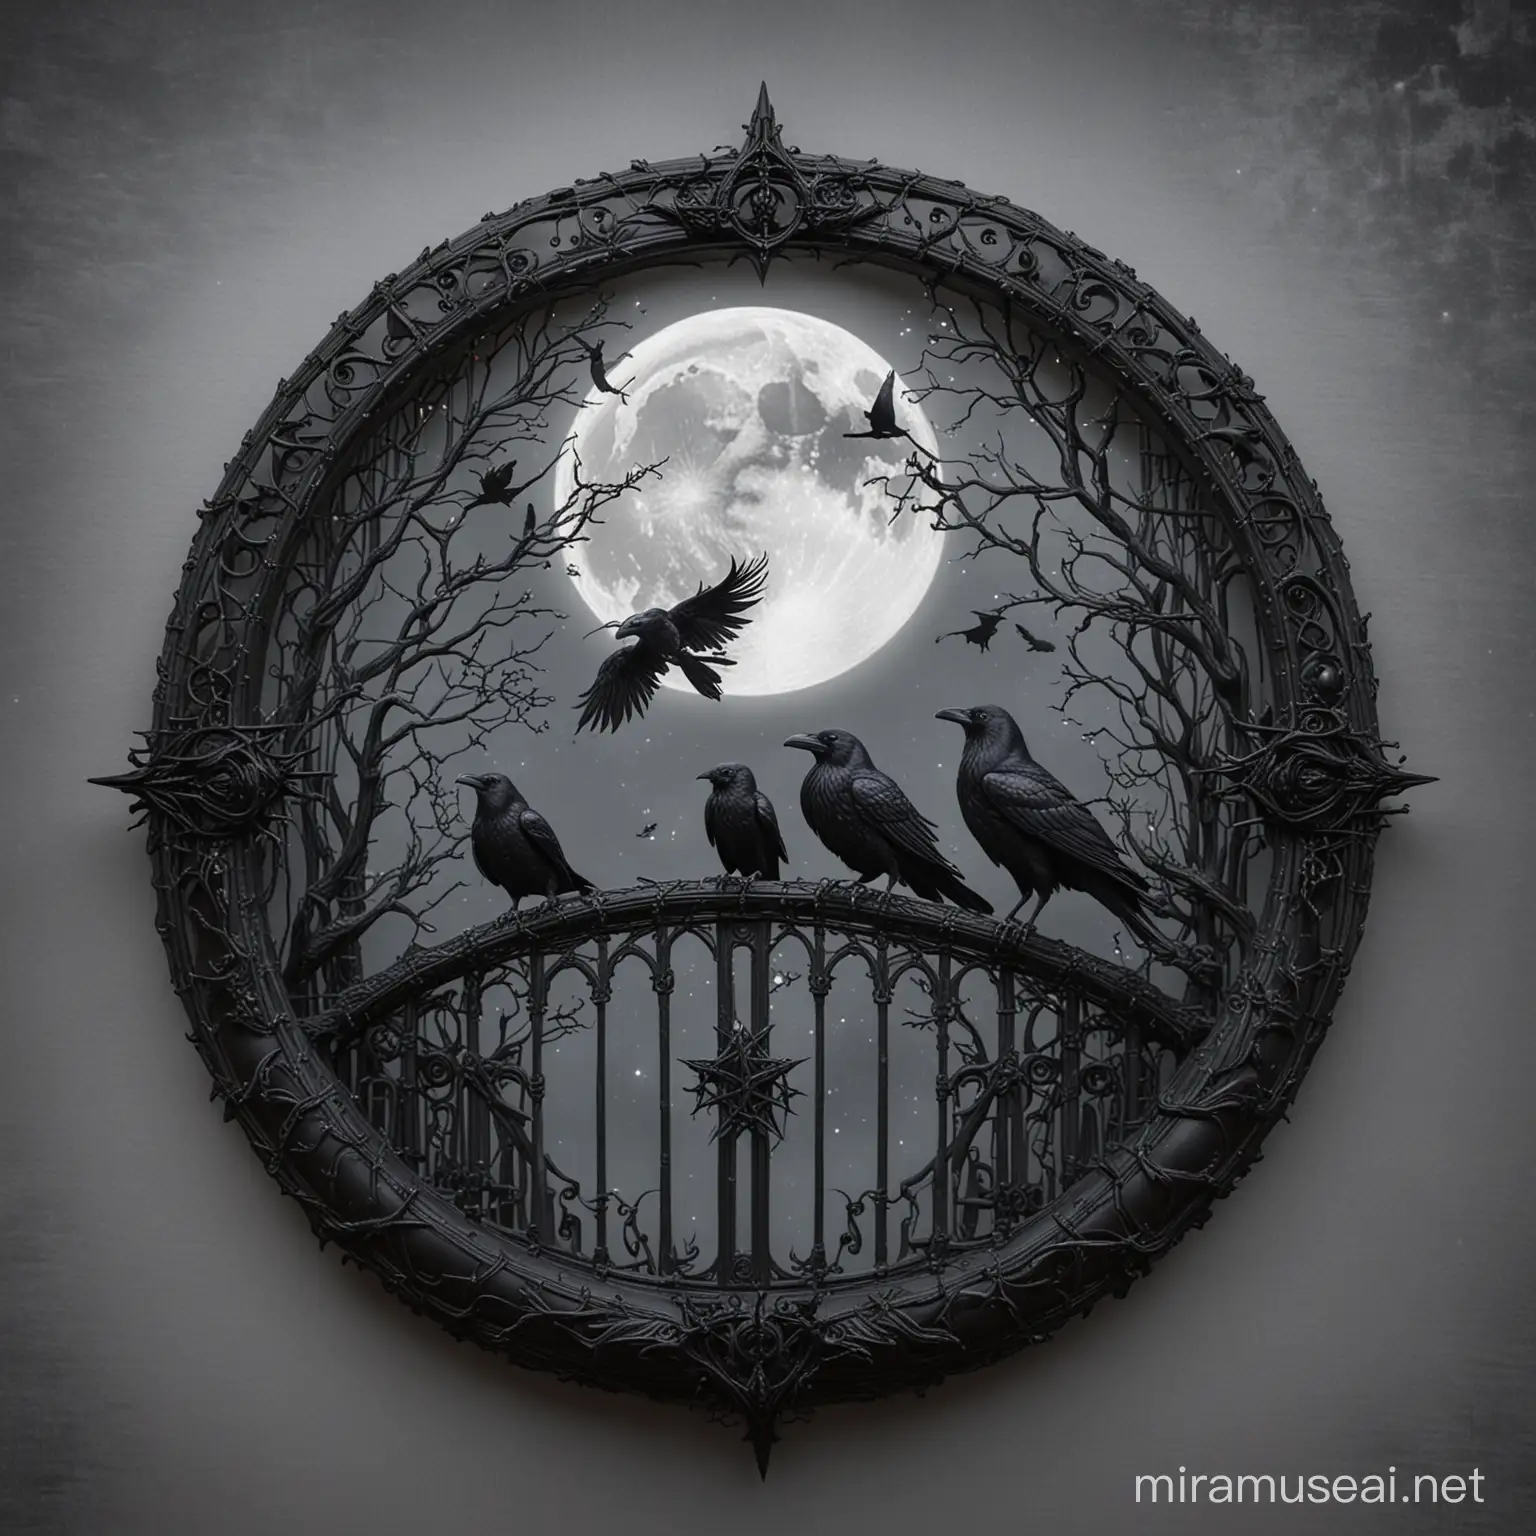 Mystical Gothic Moon Gate with Raven Silhouette